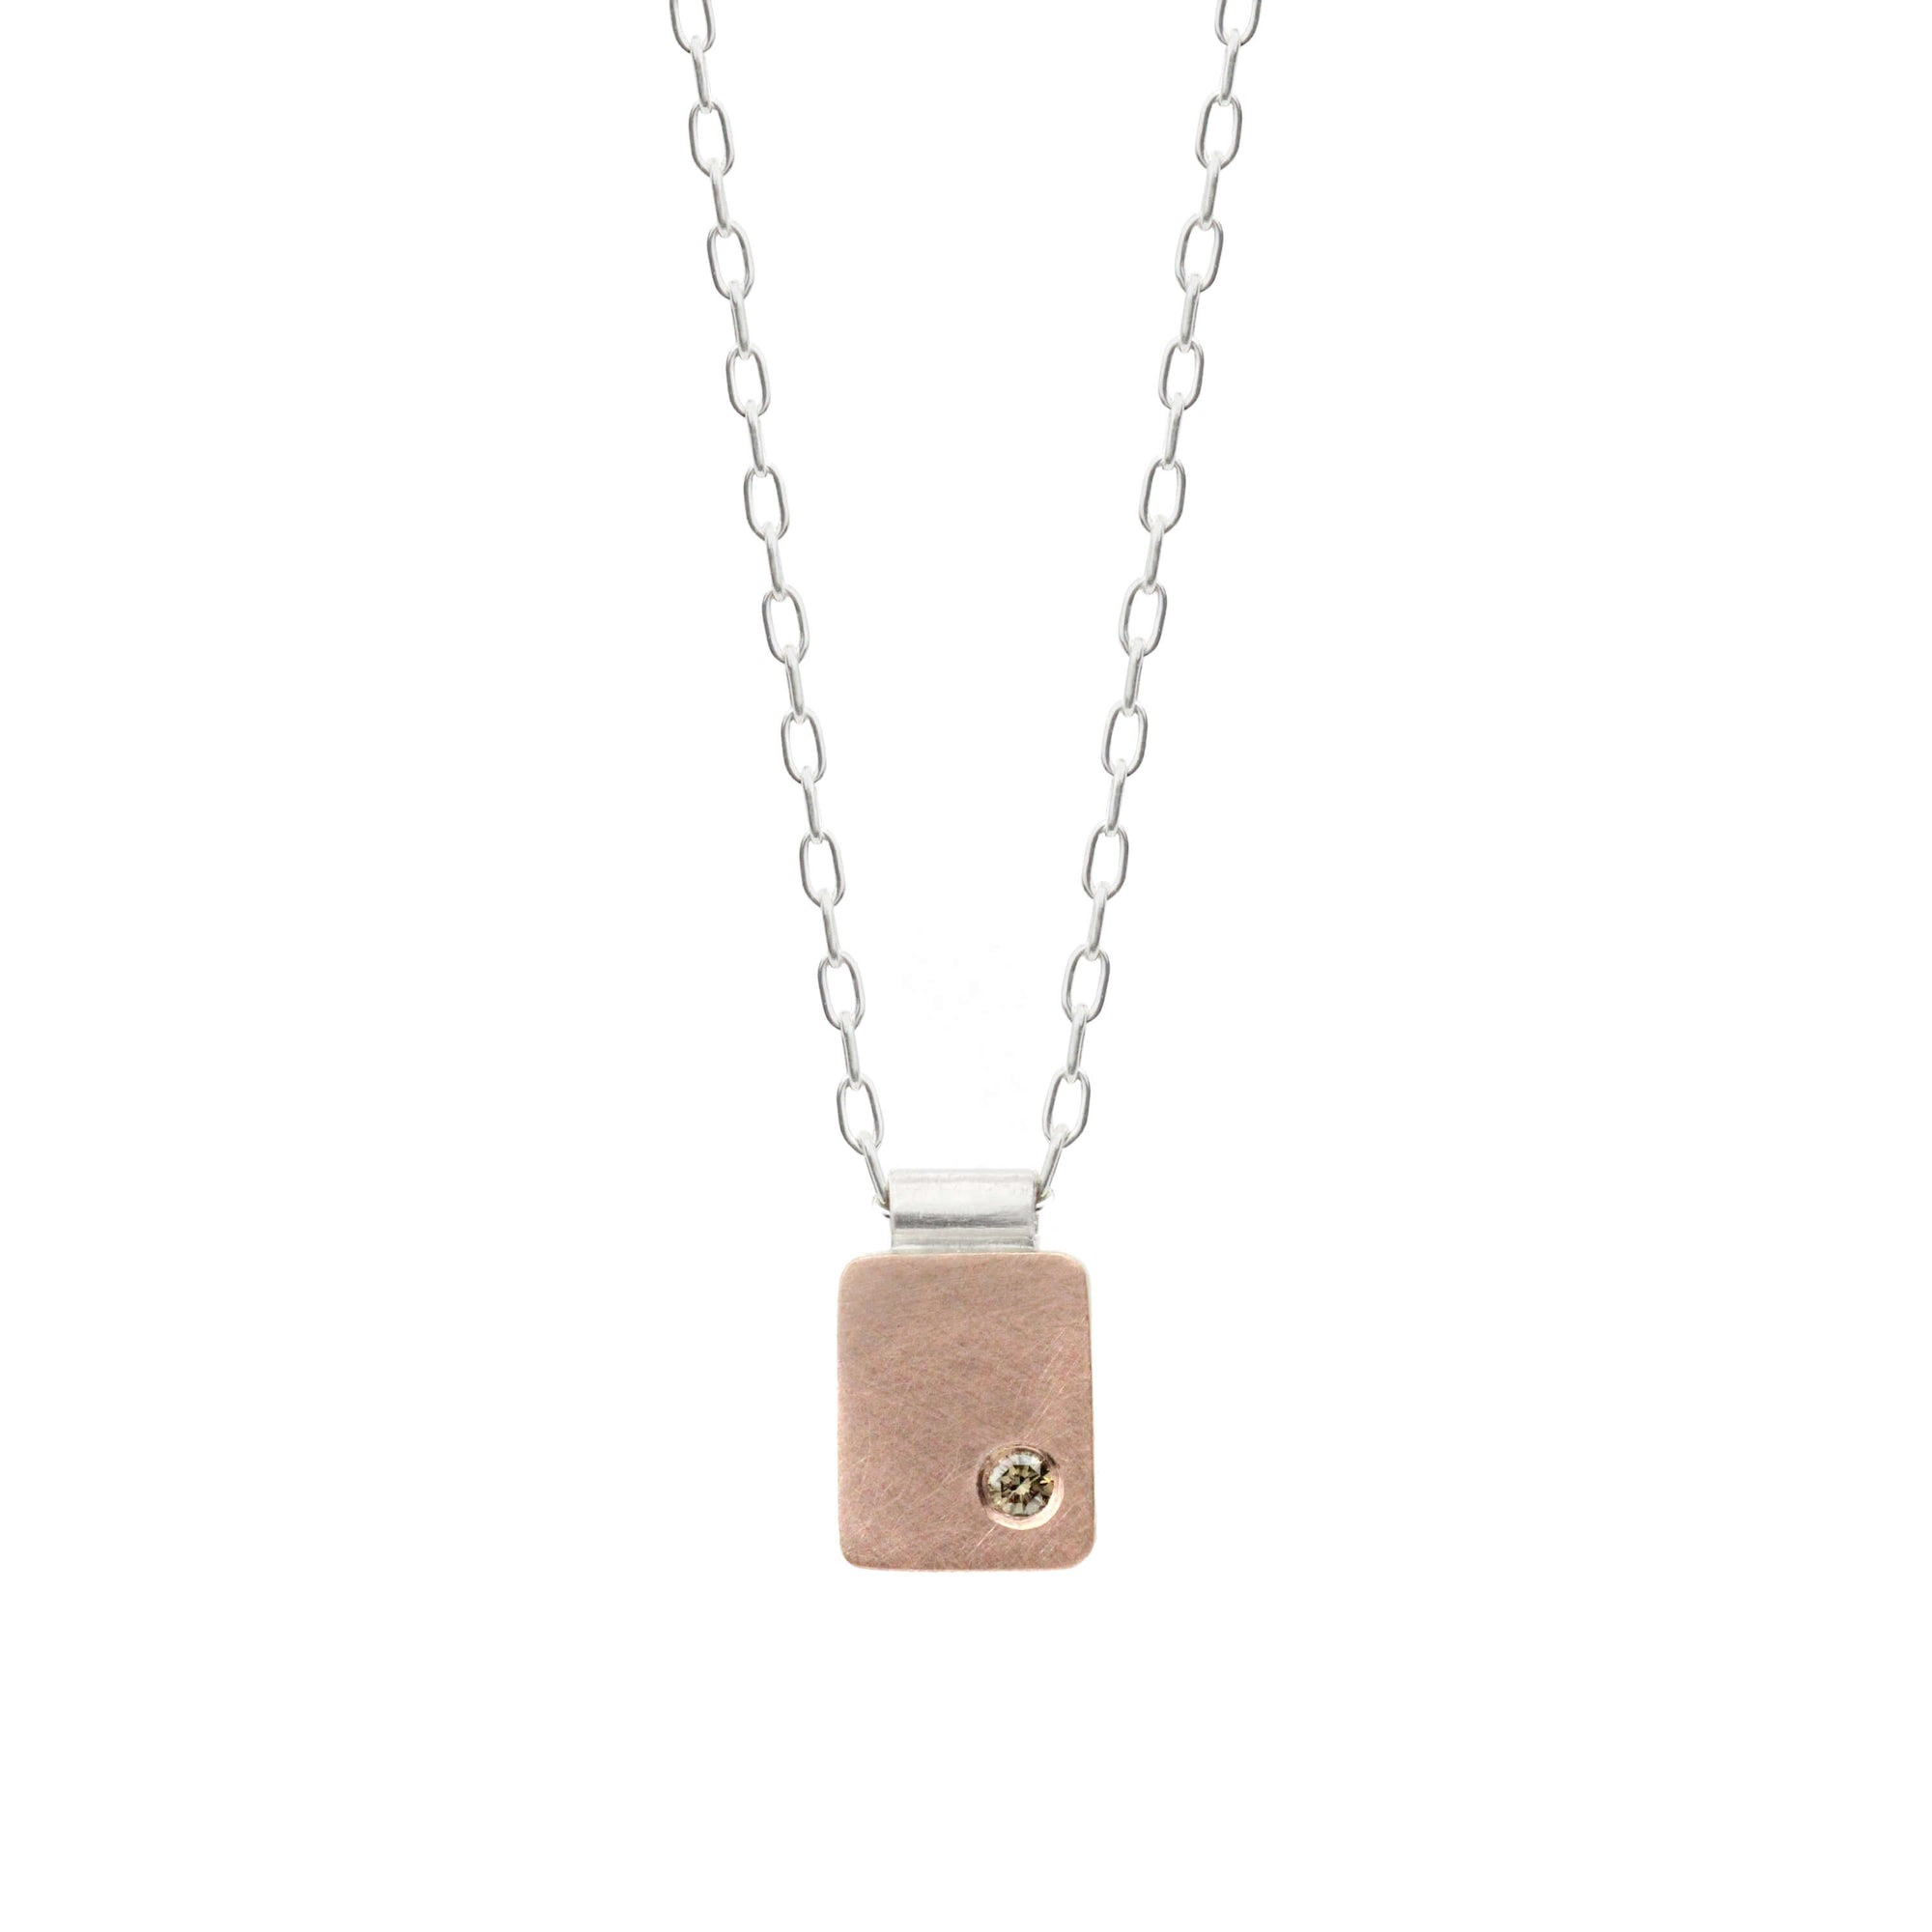 Red gold and champagne diamond rectangle cell pendant. Handmade by EC Design Jewelry using recycled metal and conflict-free stone.